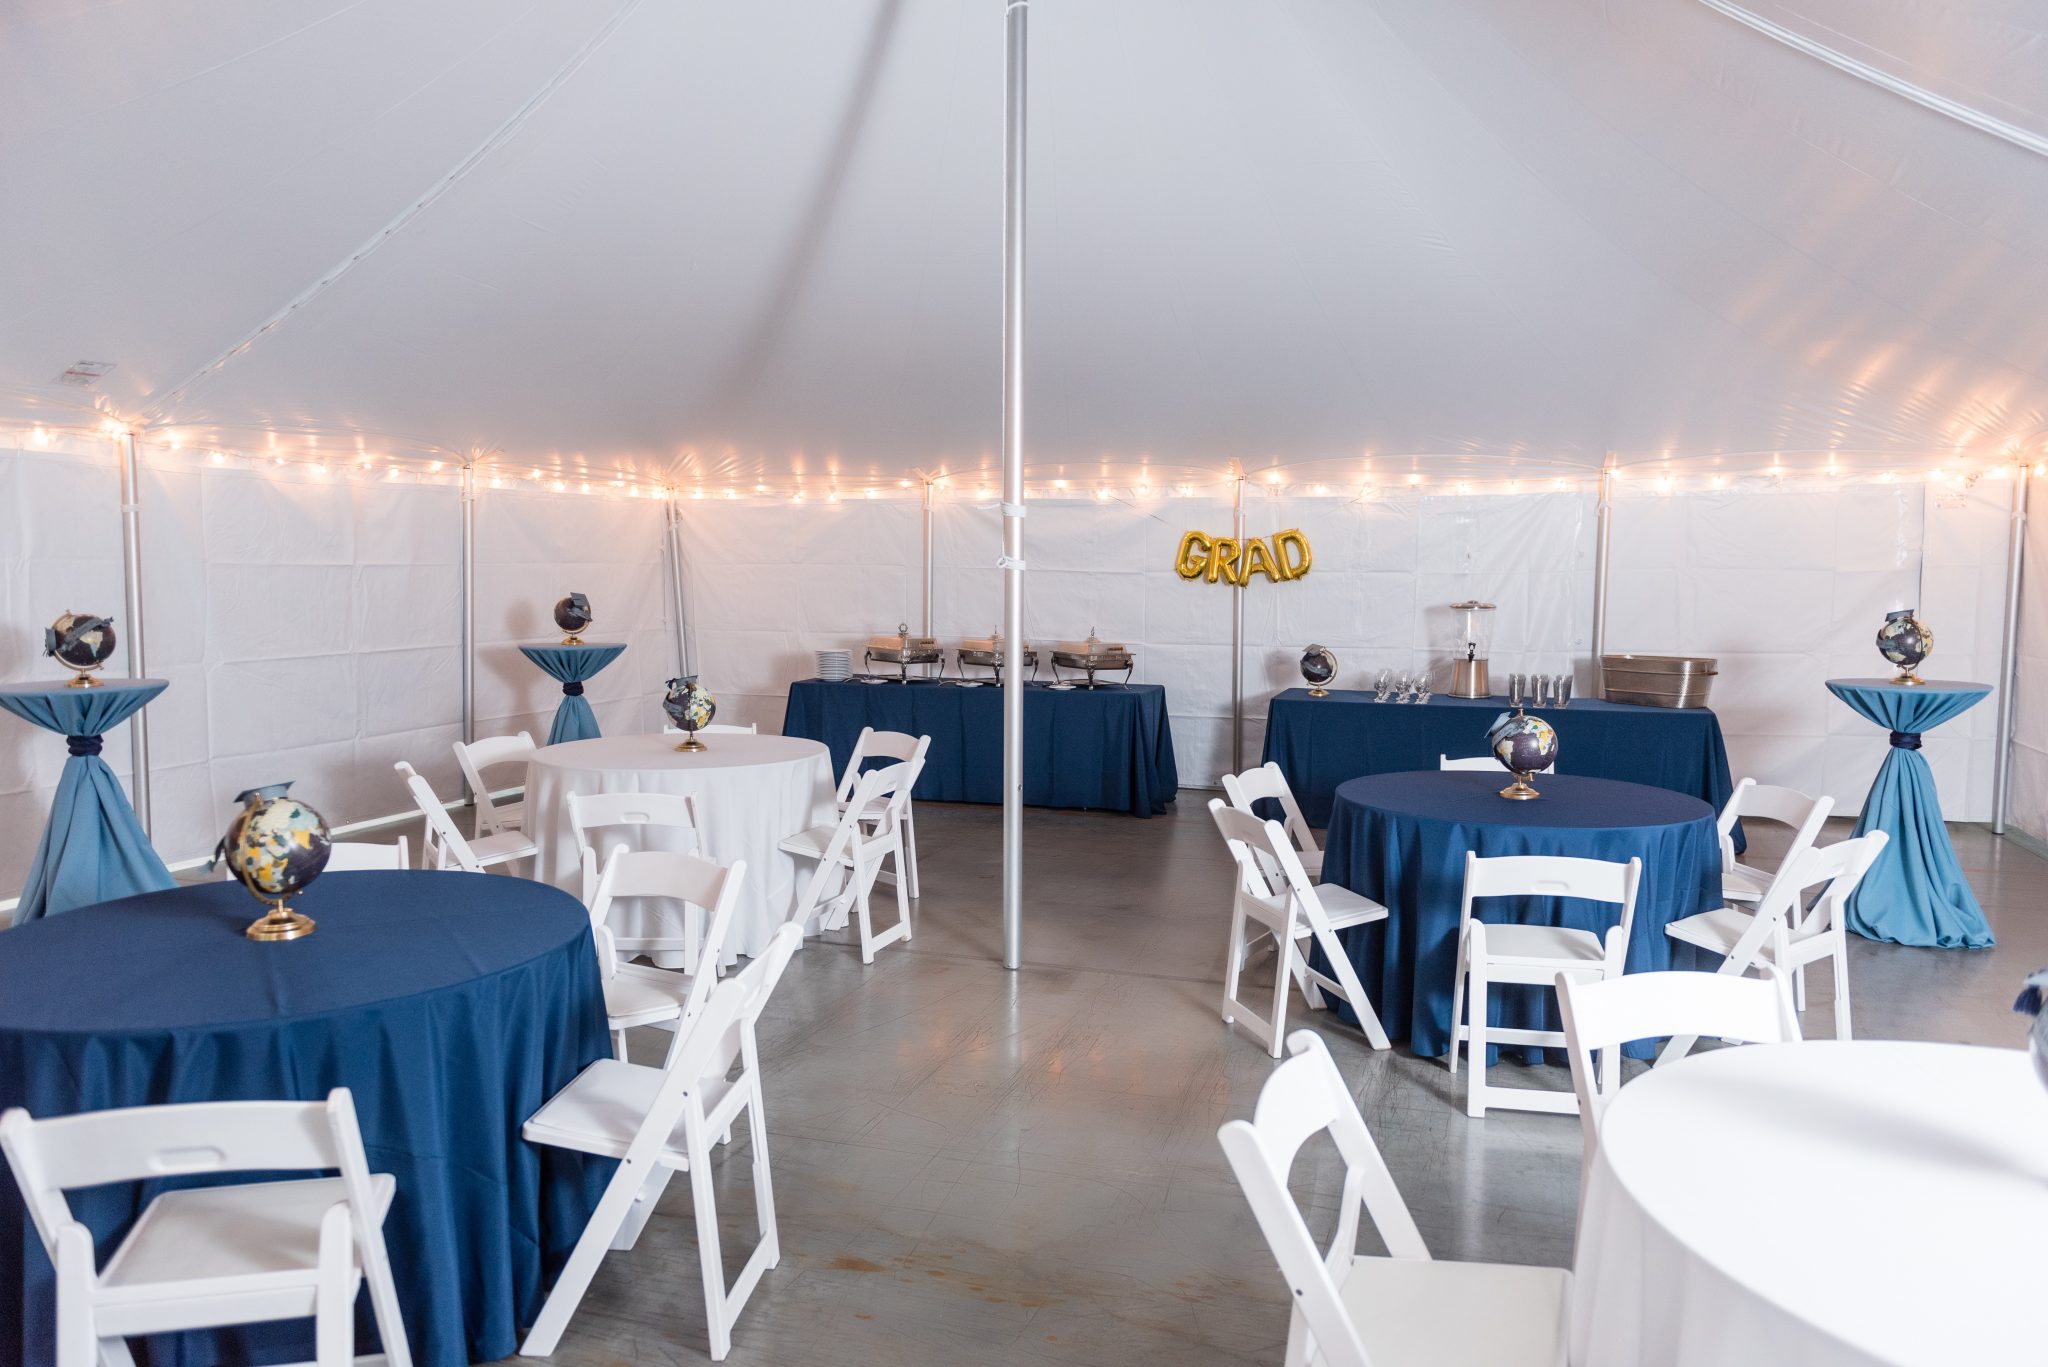 how-to-plan-a-graduation-party-a-classic-party-rental